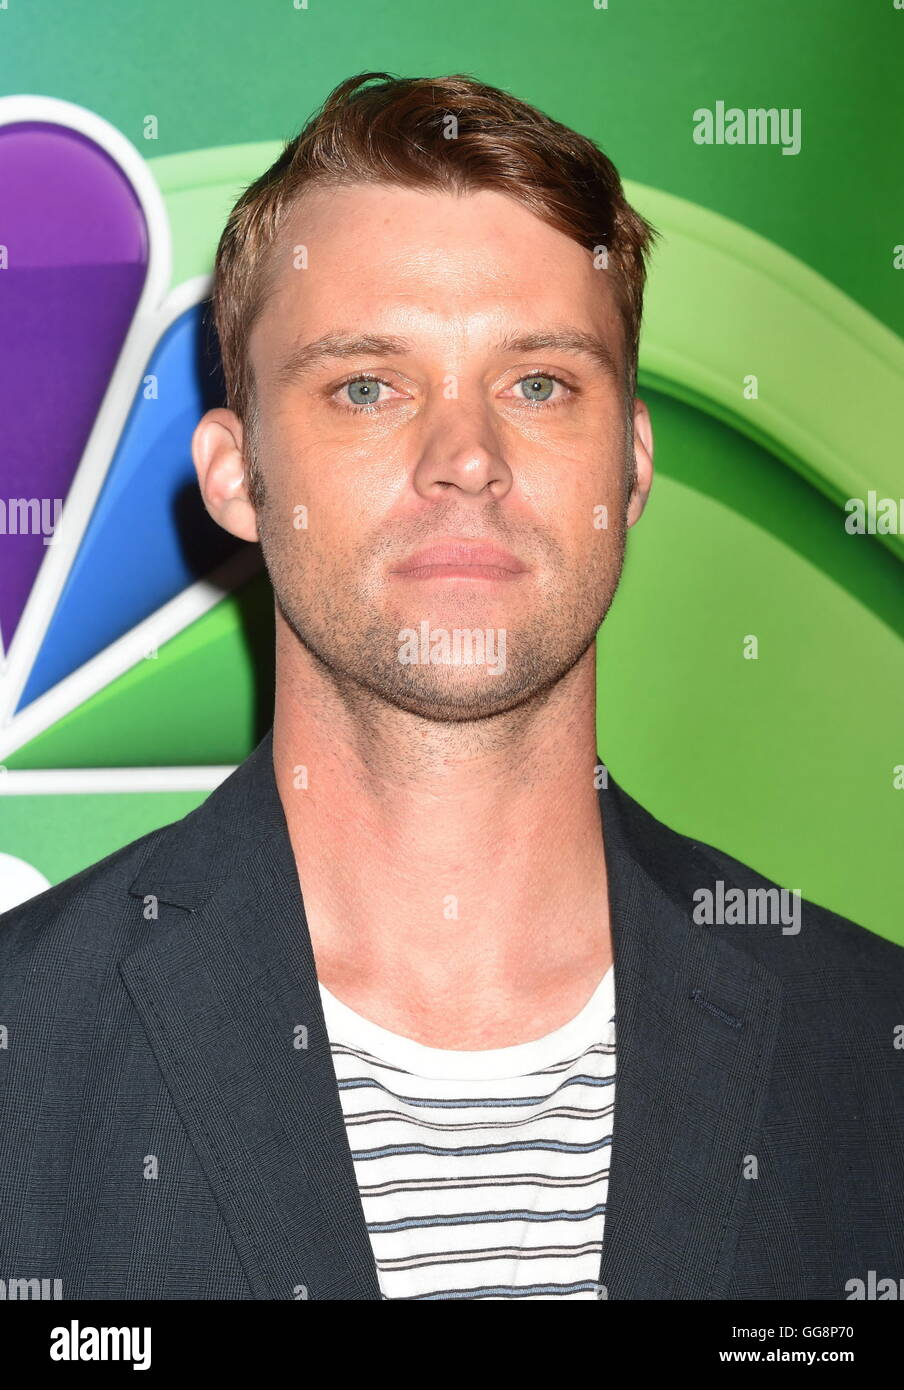 Beverly Hills, California. 2nd Aug, 2016. BEVERLY HILLS, CA - AUGUST 02: Actor Jesse Spencer attends the 2016 Summer TCA Tour - NBCUniversal Press Tour at the Beverly Hilton Hotel on August 2, 2016 in Beverly Hills, California. | Verwendung weltweit © dpa/Alamy Live News Stock Photo